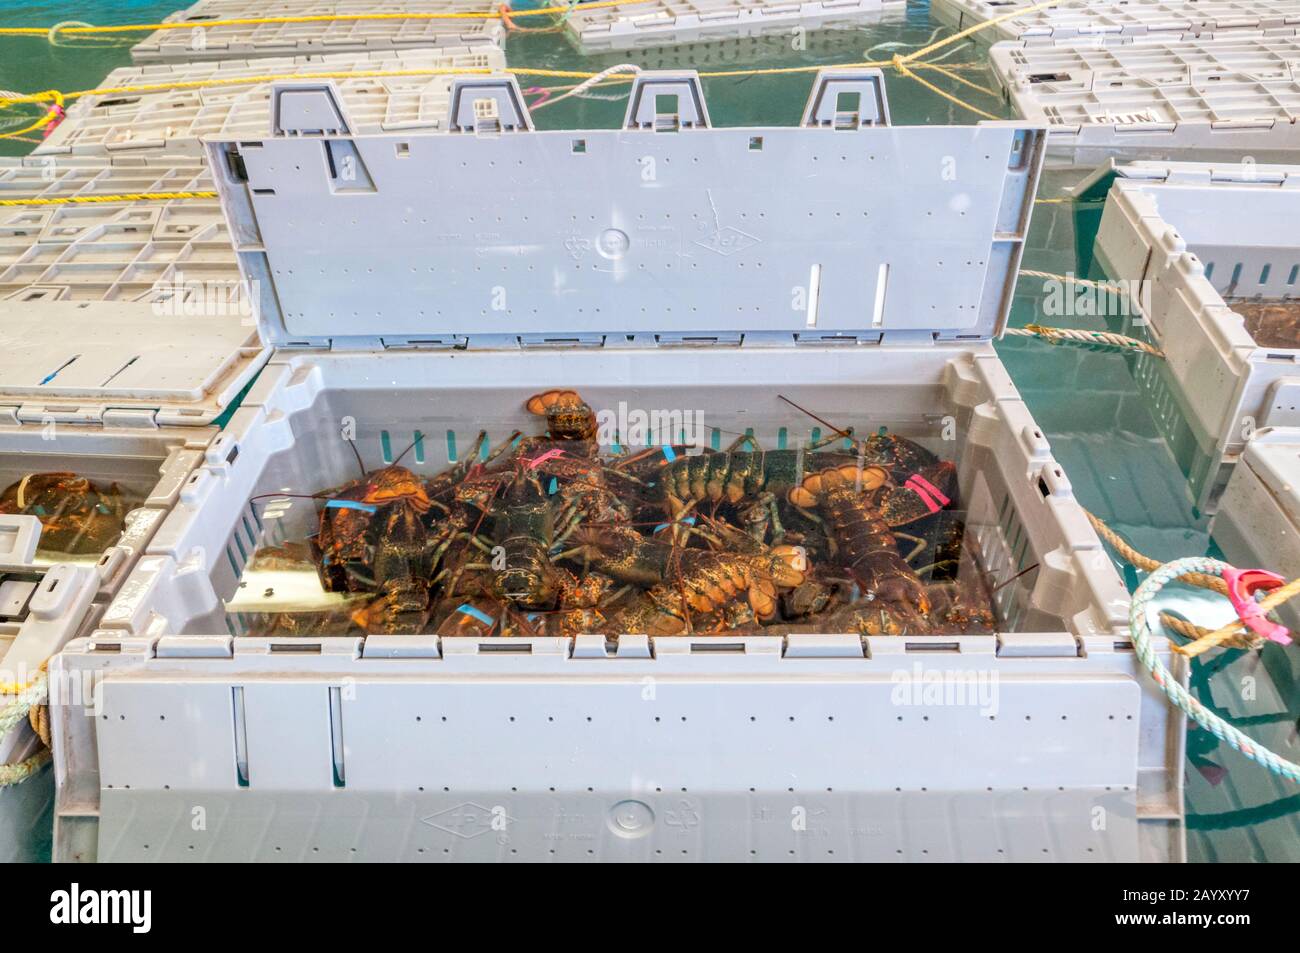 A lobster pound at Twillingate in Newfoundland, Canada. Stock Photo